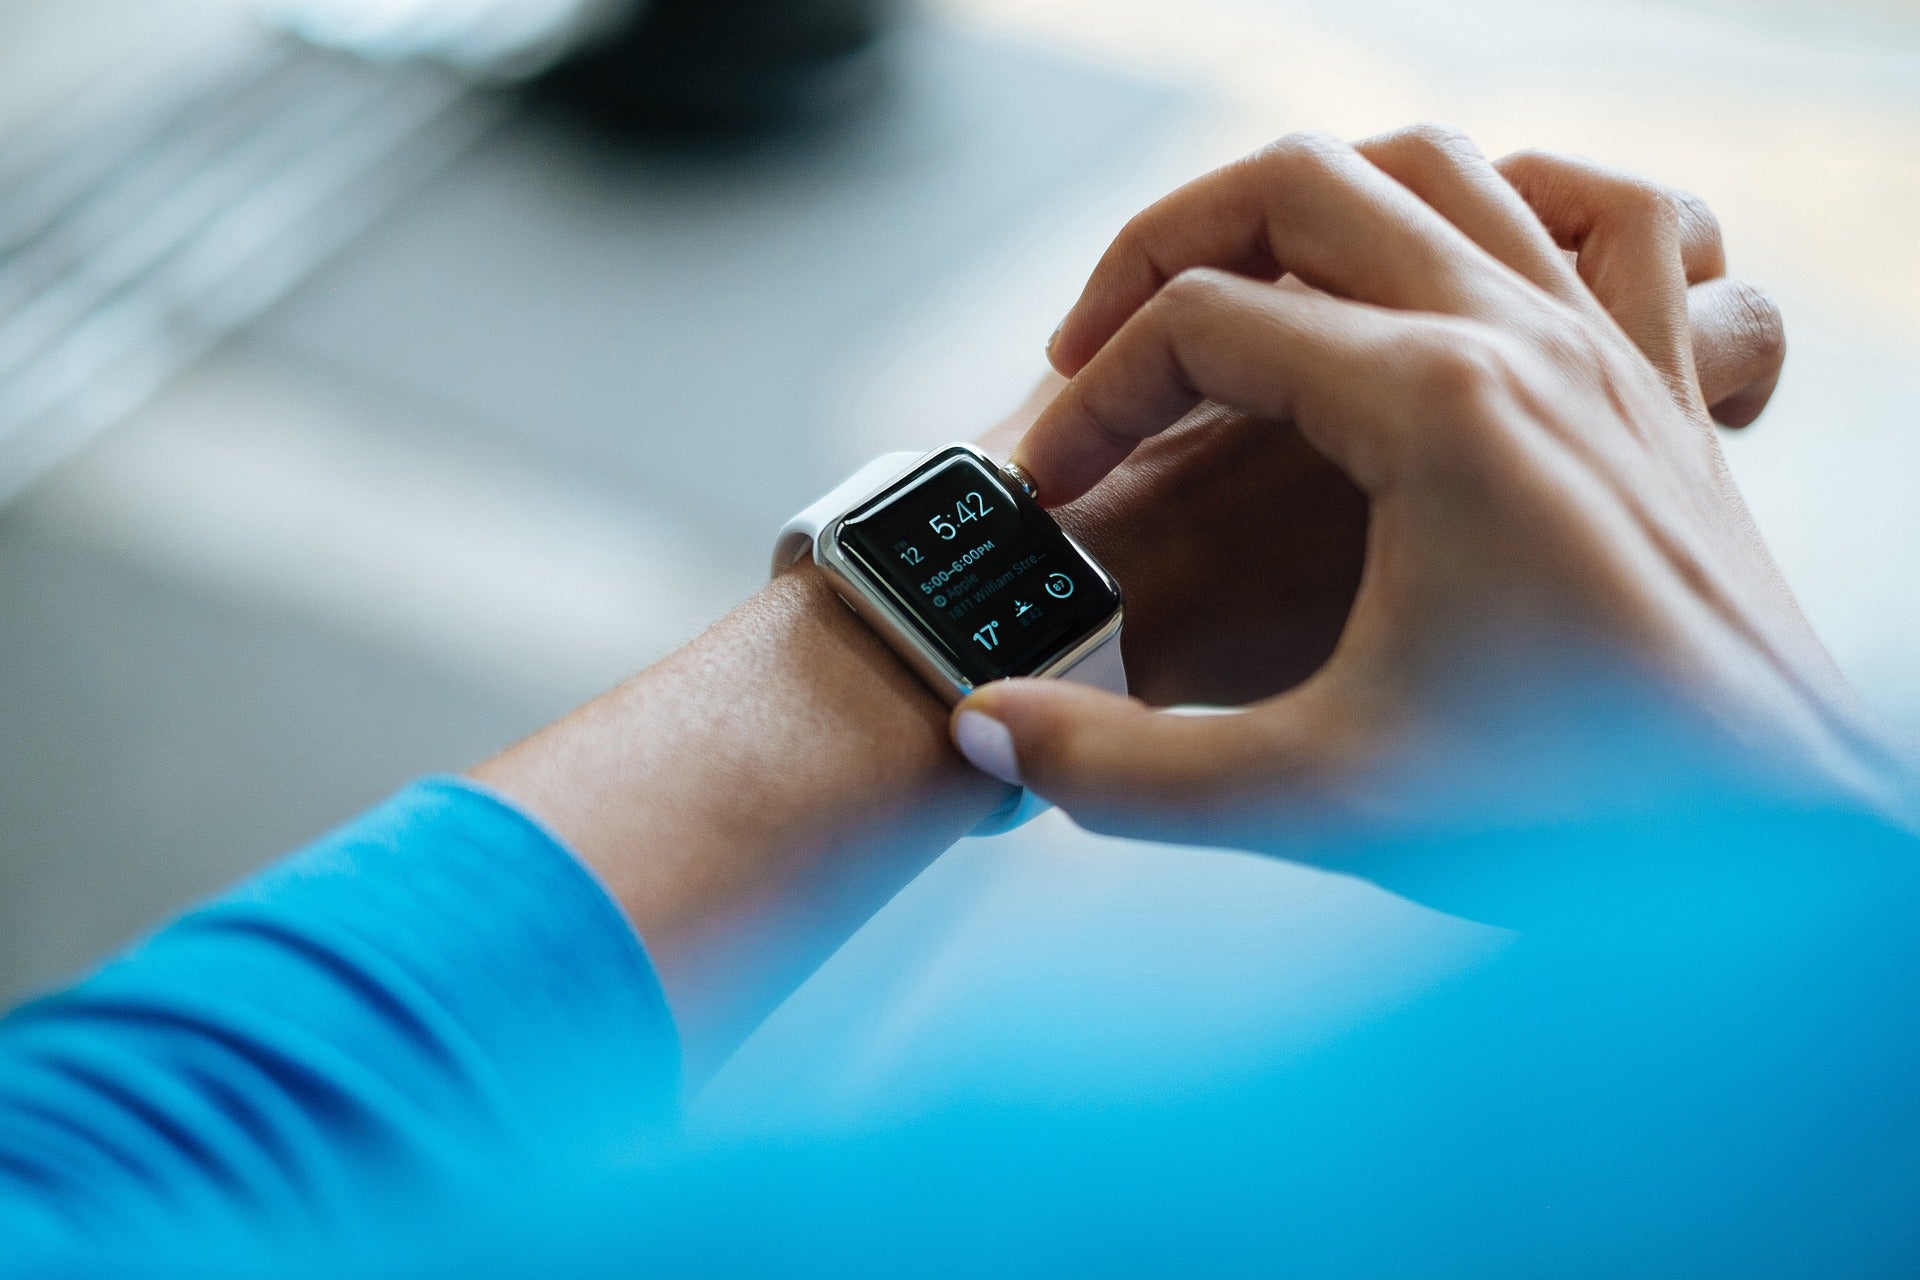 Wearable banking to hit 2bn users by 2020